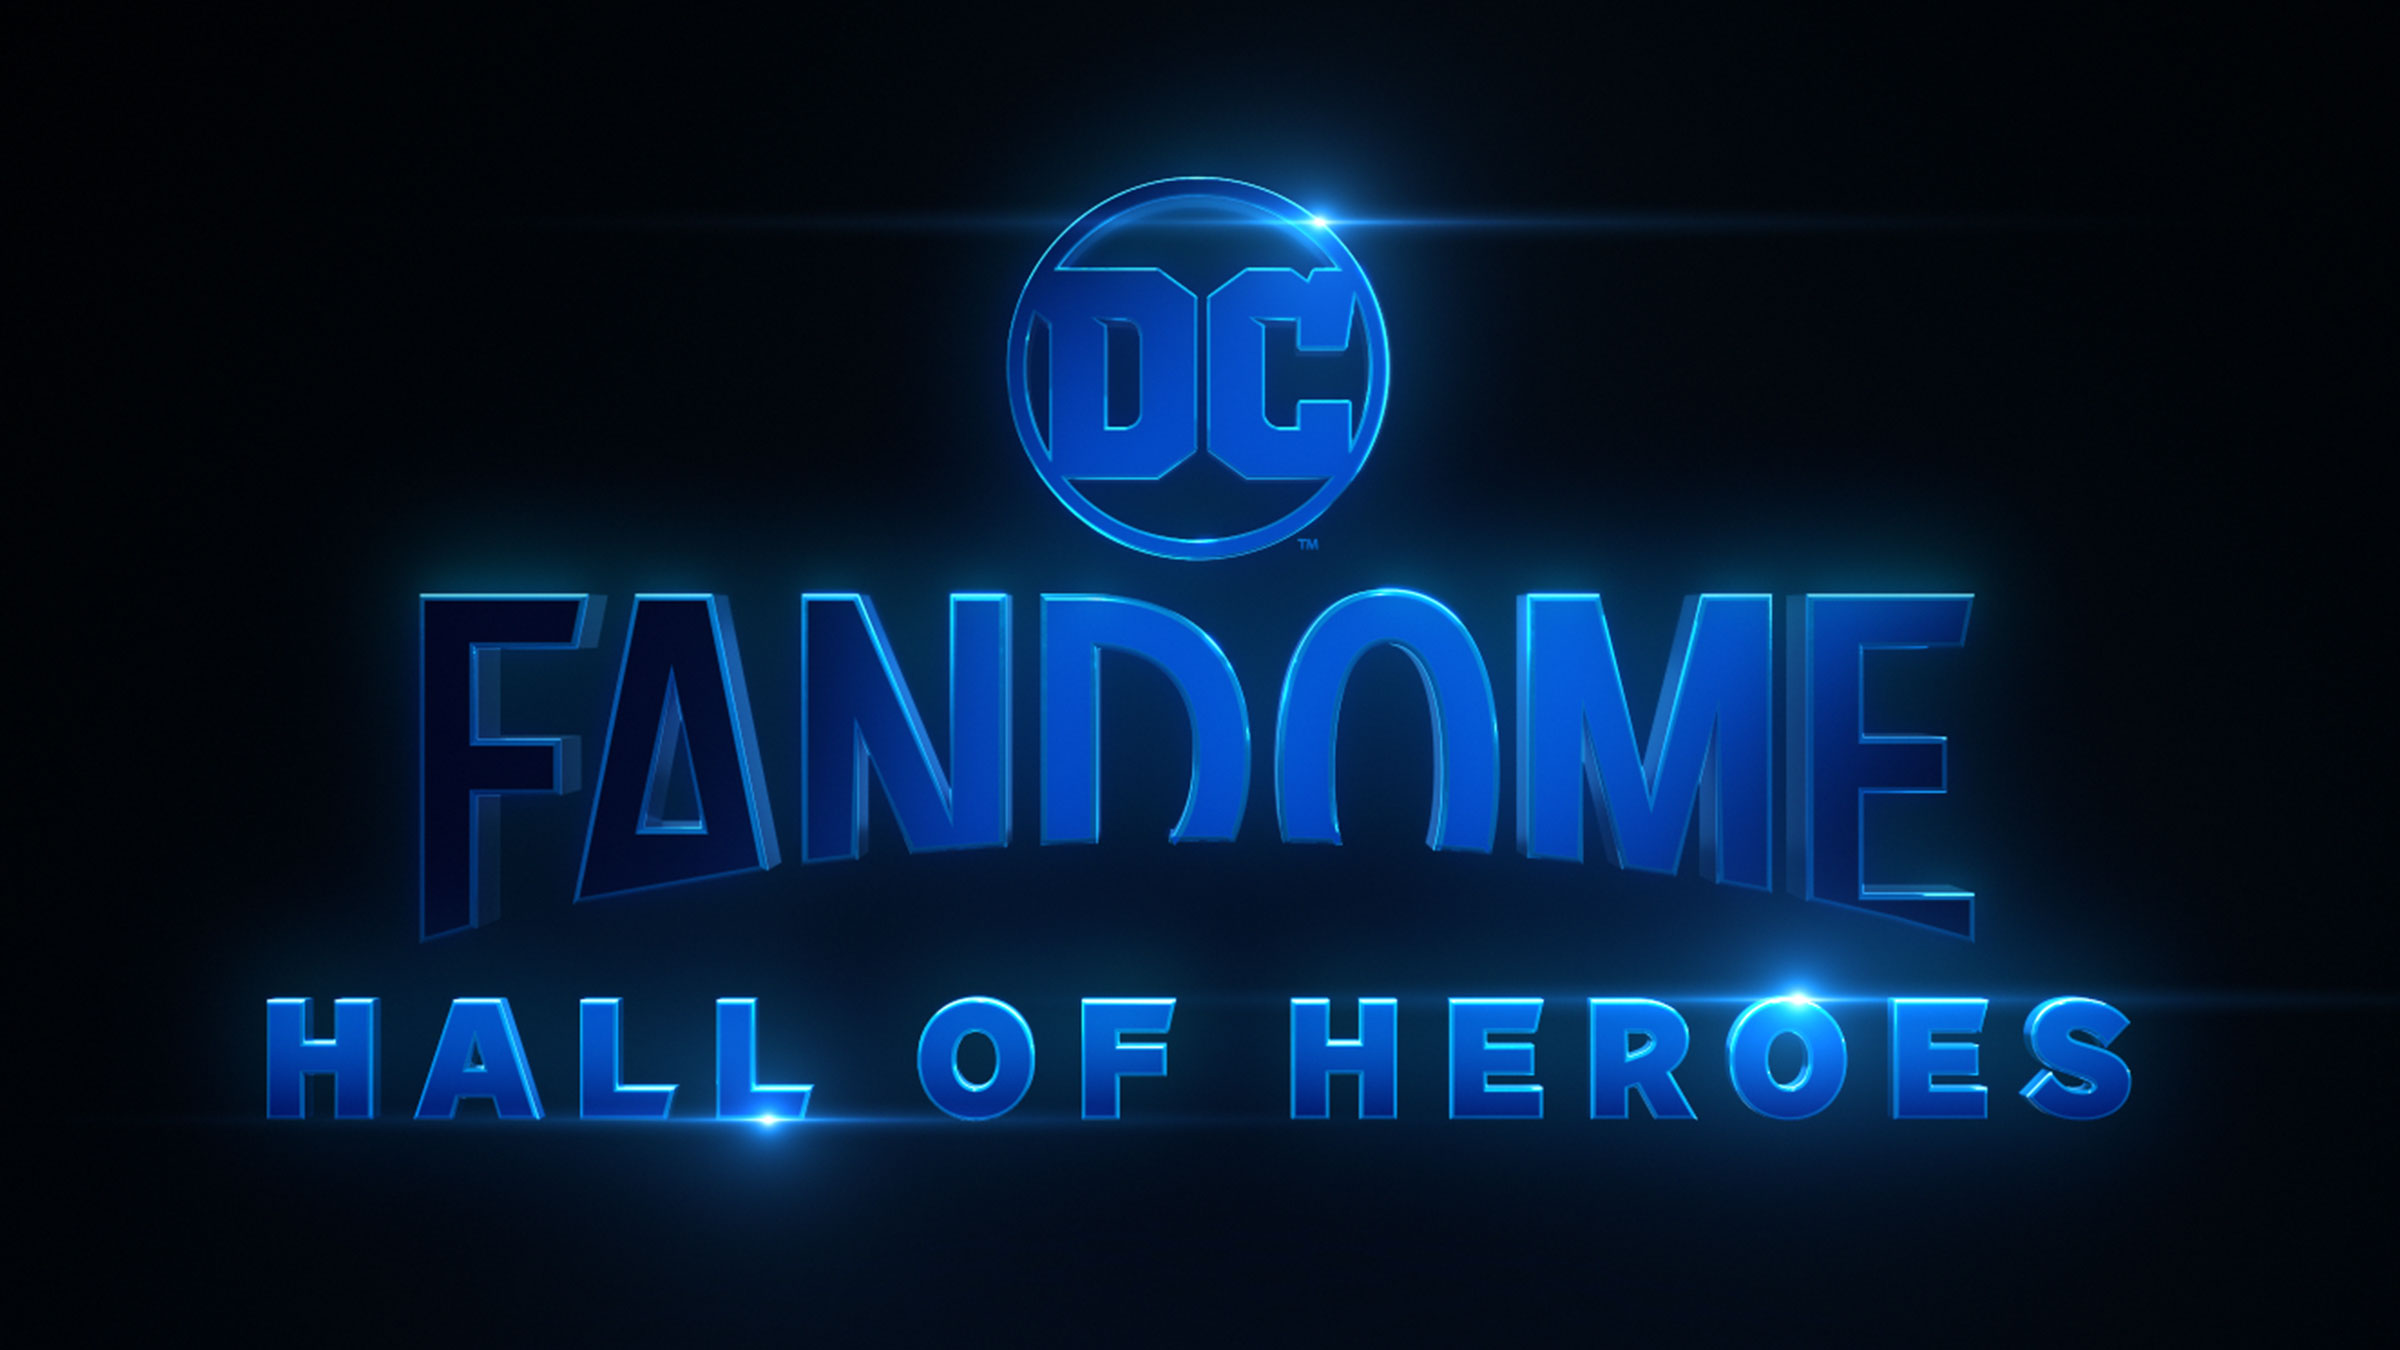 DC FanDome Dominated Saturday With 22 Million Views